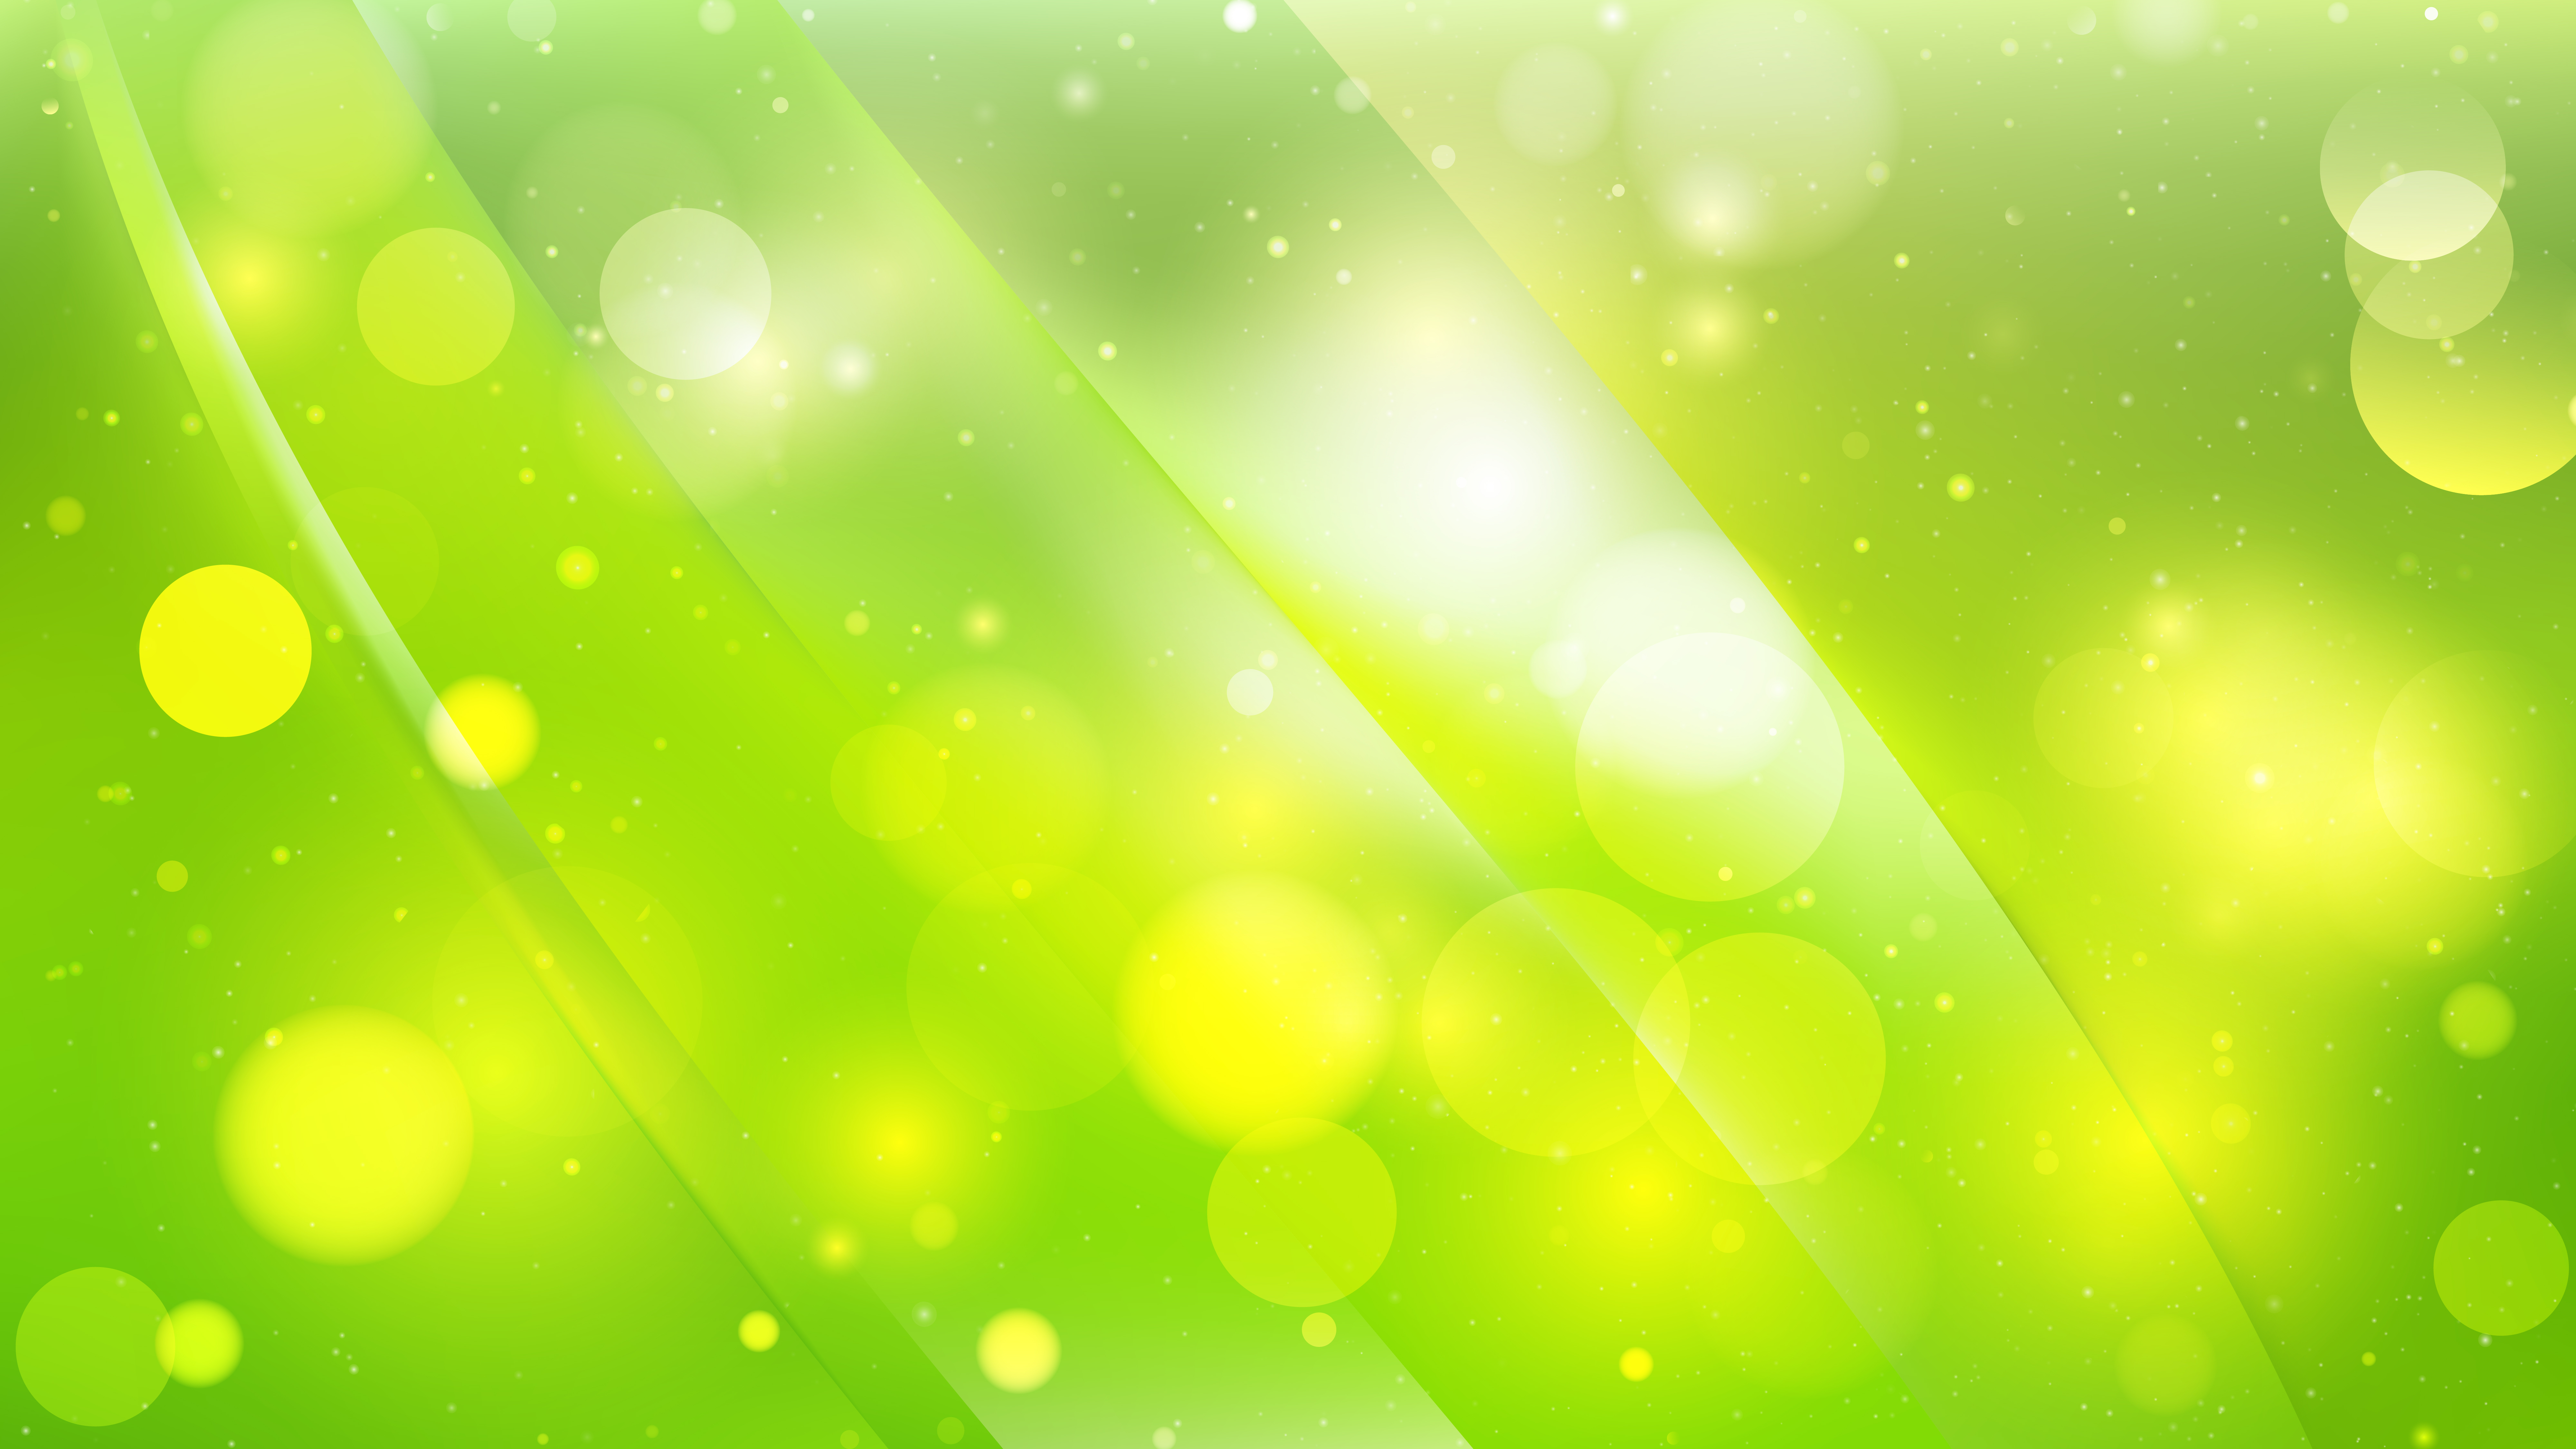 Free Abstract Green and Yellow Lights Background Image